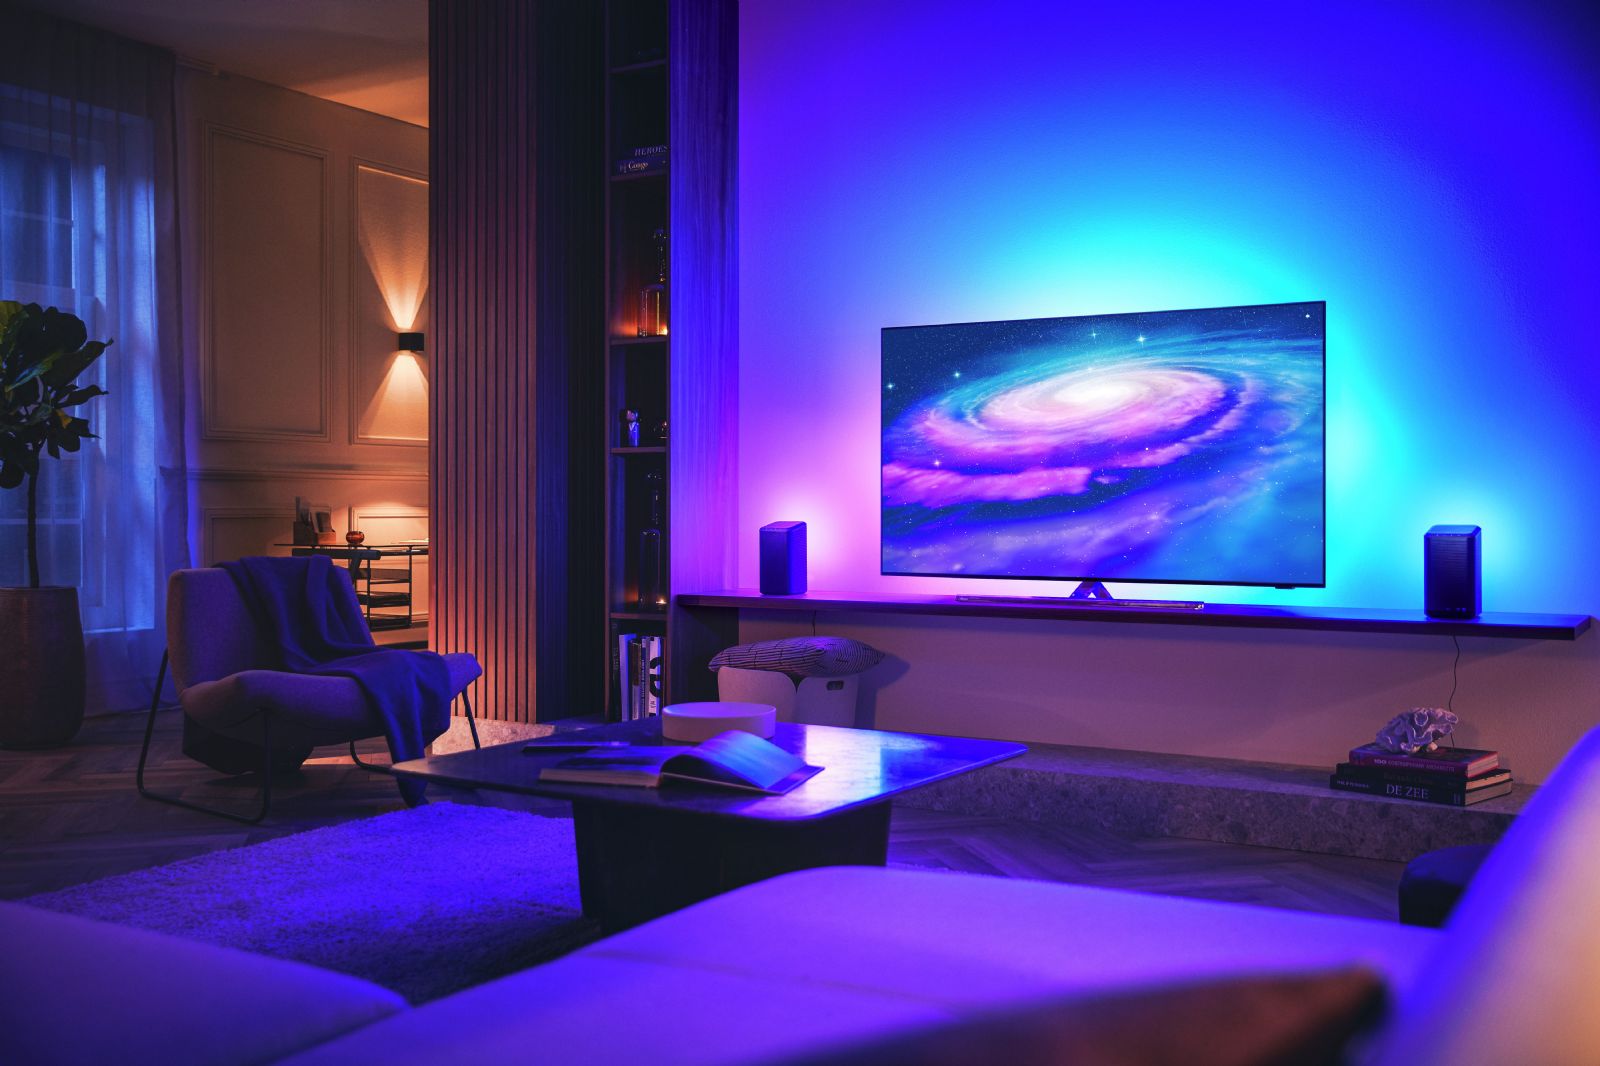 TV-apparater Philips 55OLED807 55-tums 4K UHD Smart OLED-TV